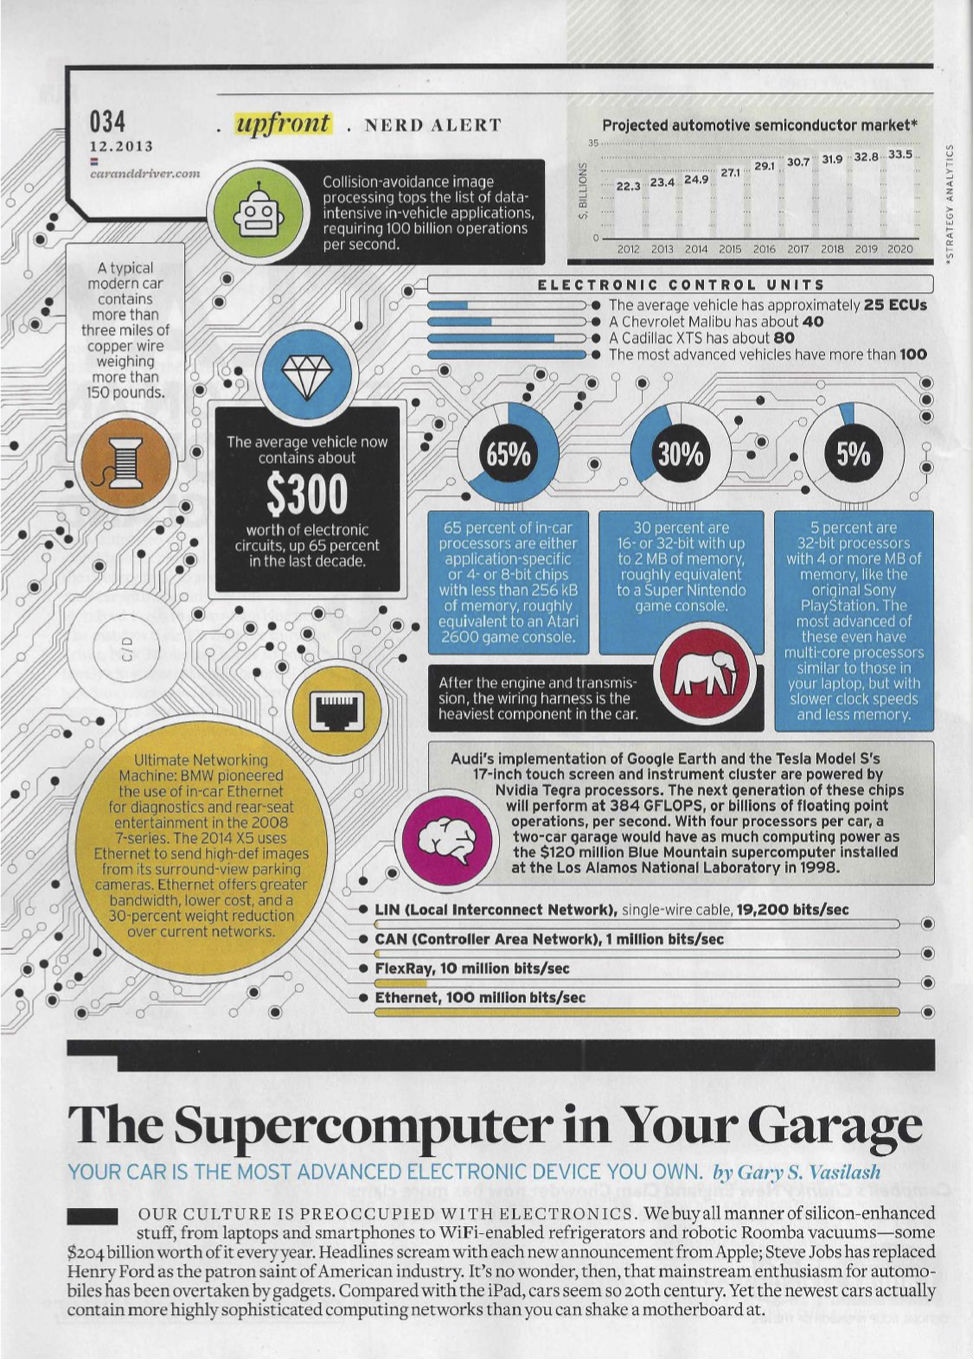 The Supercomputer in your Garage